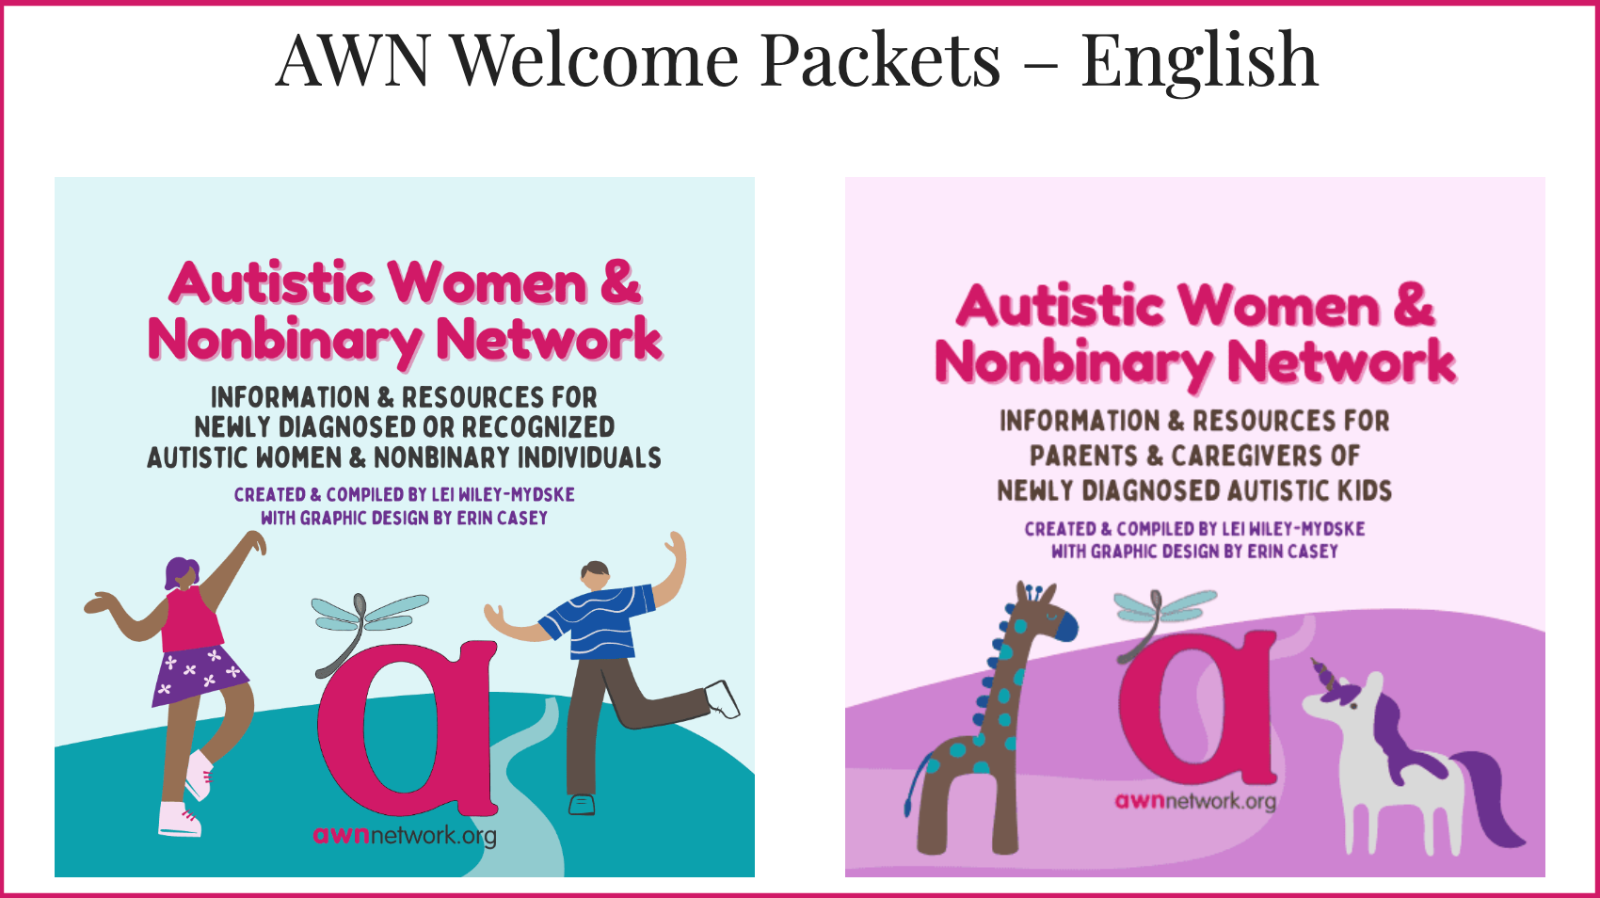 AWN Welcome Packets – English. Left image has illustration of 2 dancing people with text 